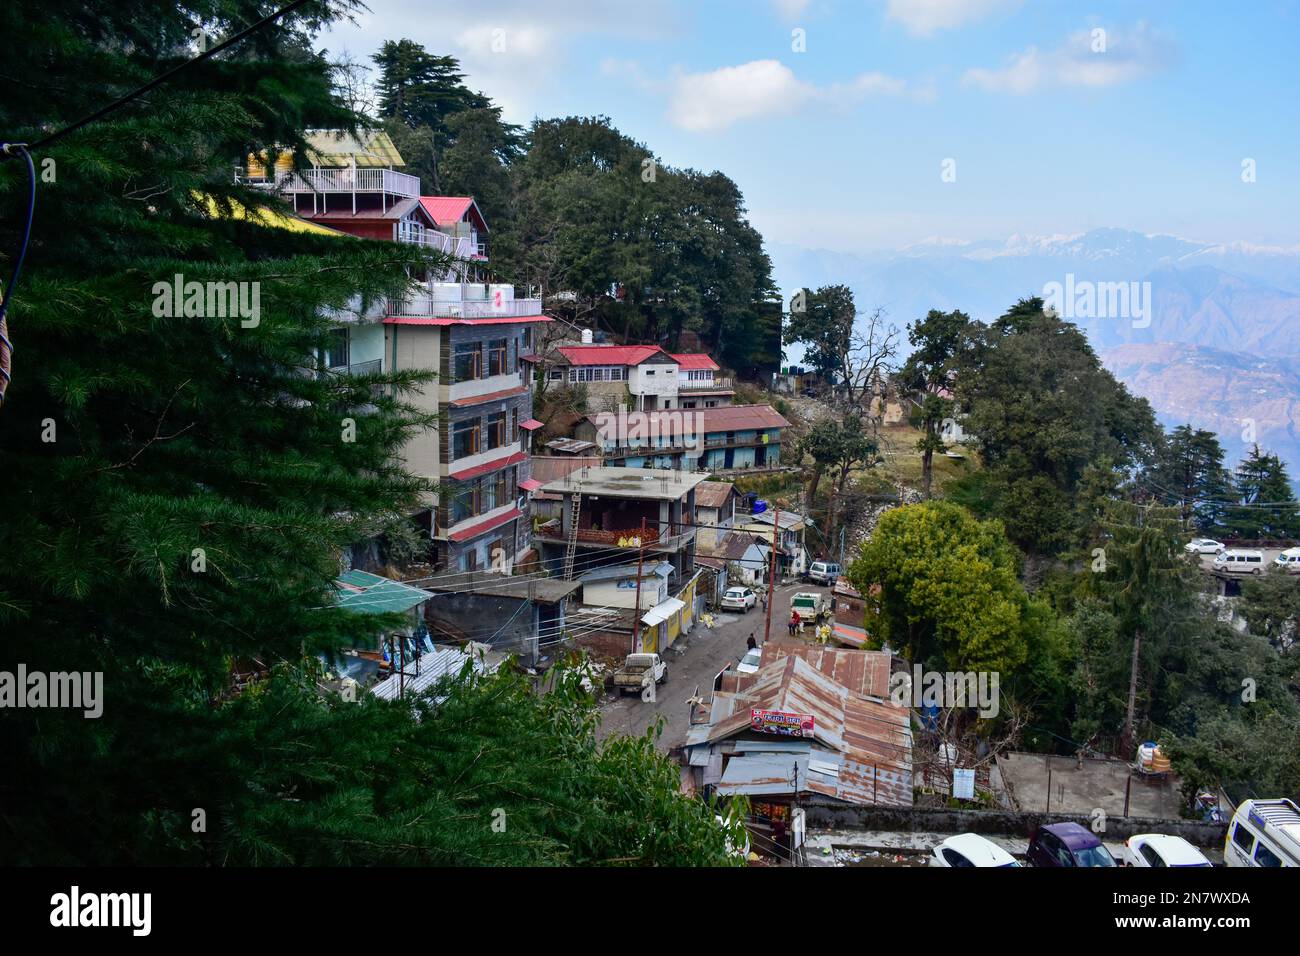 View of Houses and Hotels in Dalhousie, Himachal Pradesh, India Stock Photo